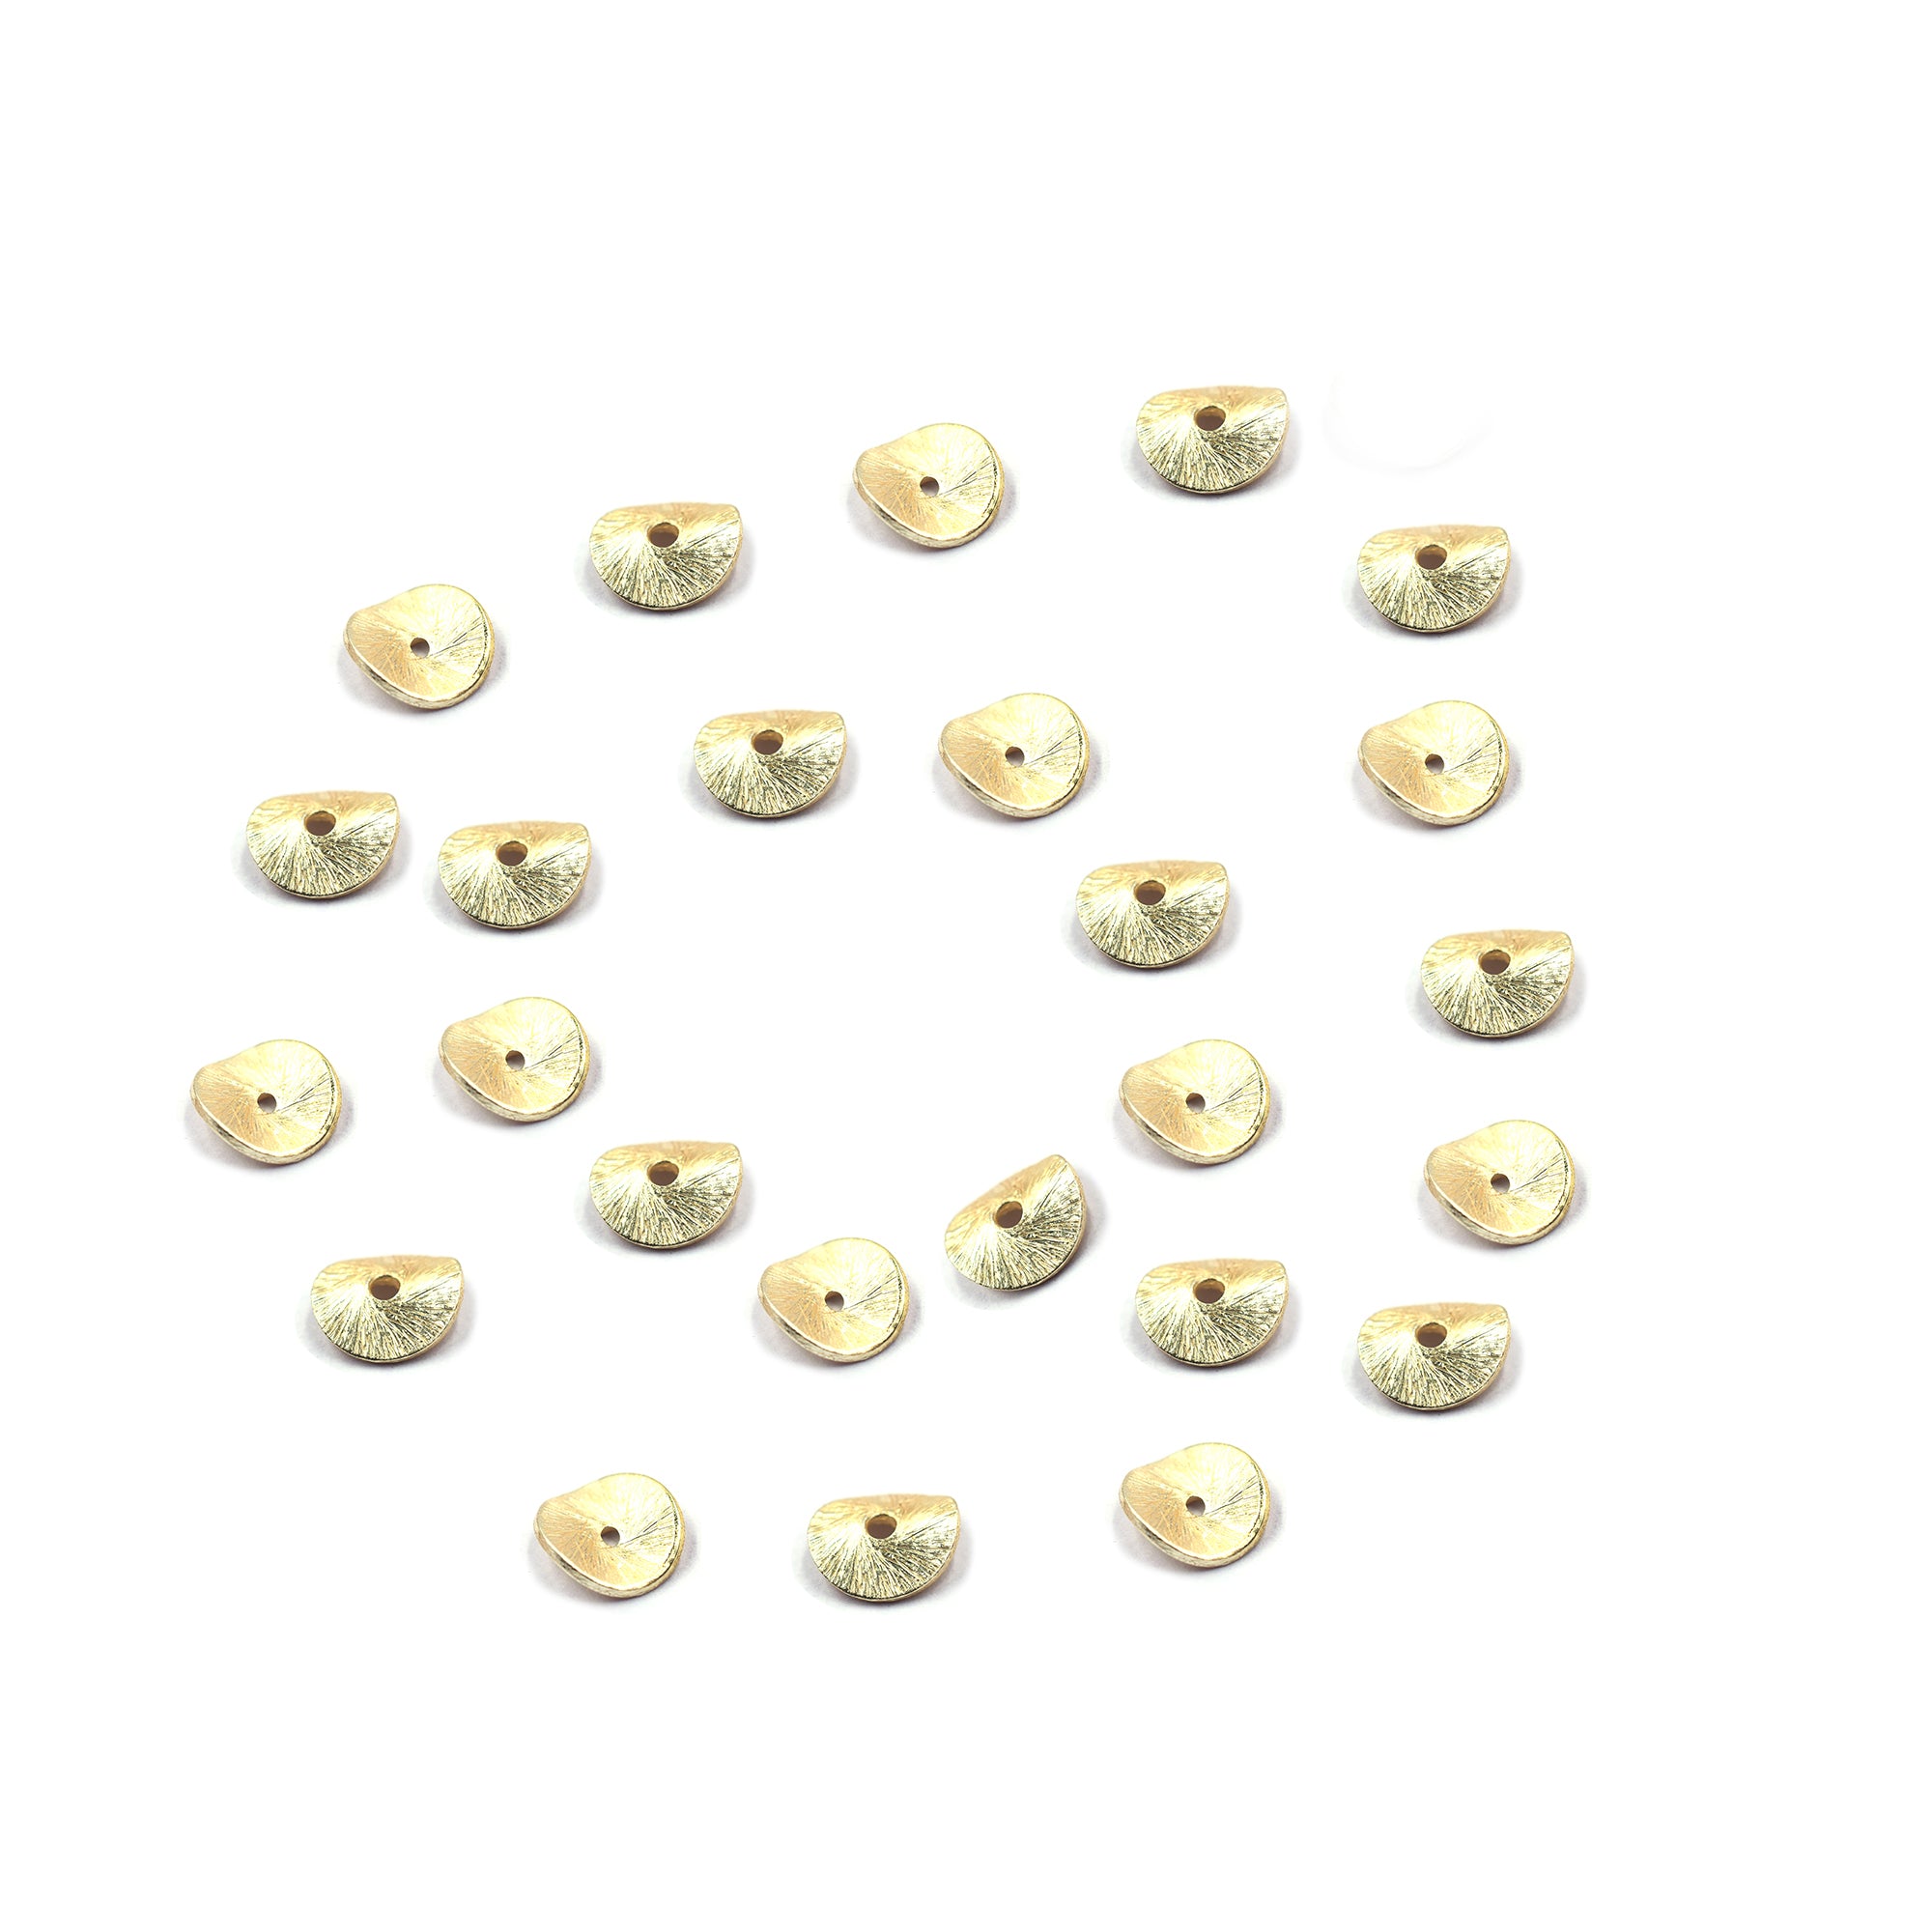 100 Pcs 6mm Wavy Disc Brushed Matte Finish Beads Gold Plated Copper